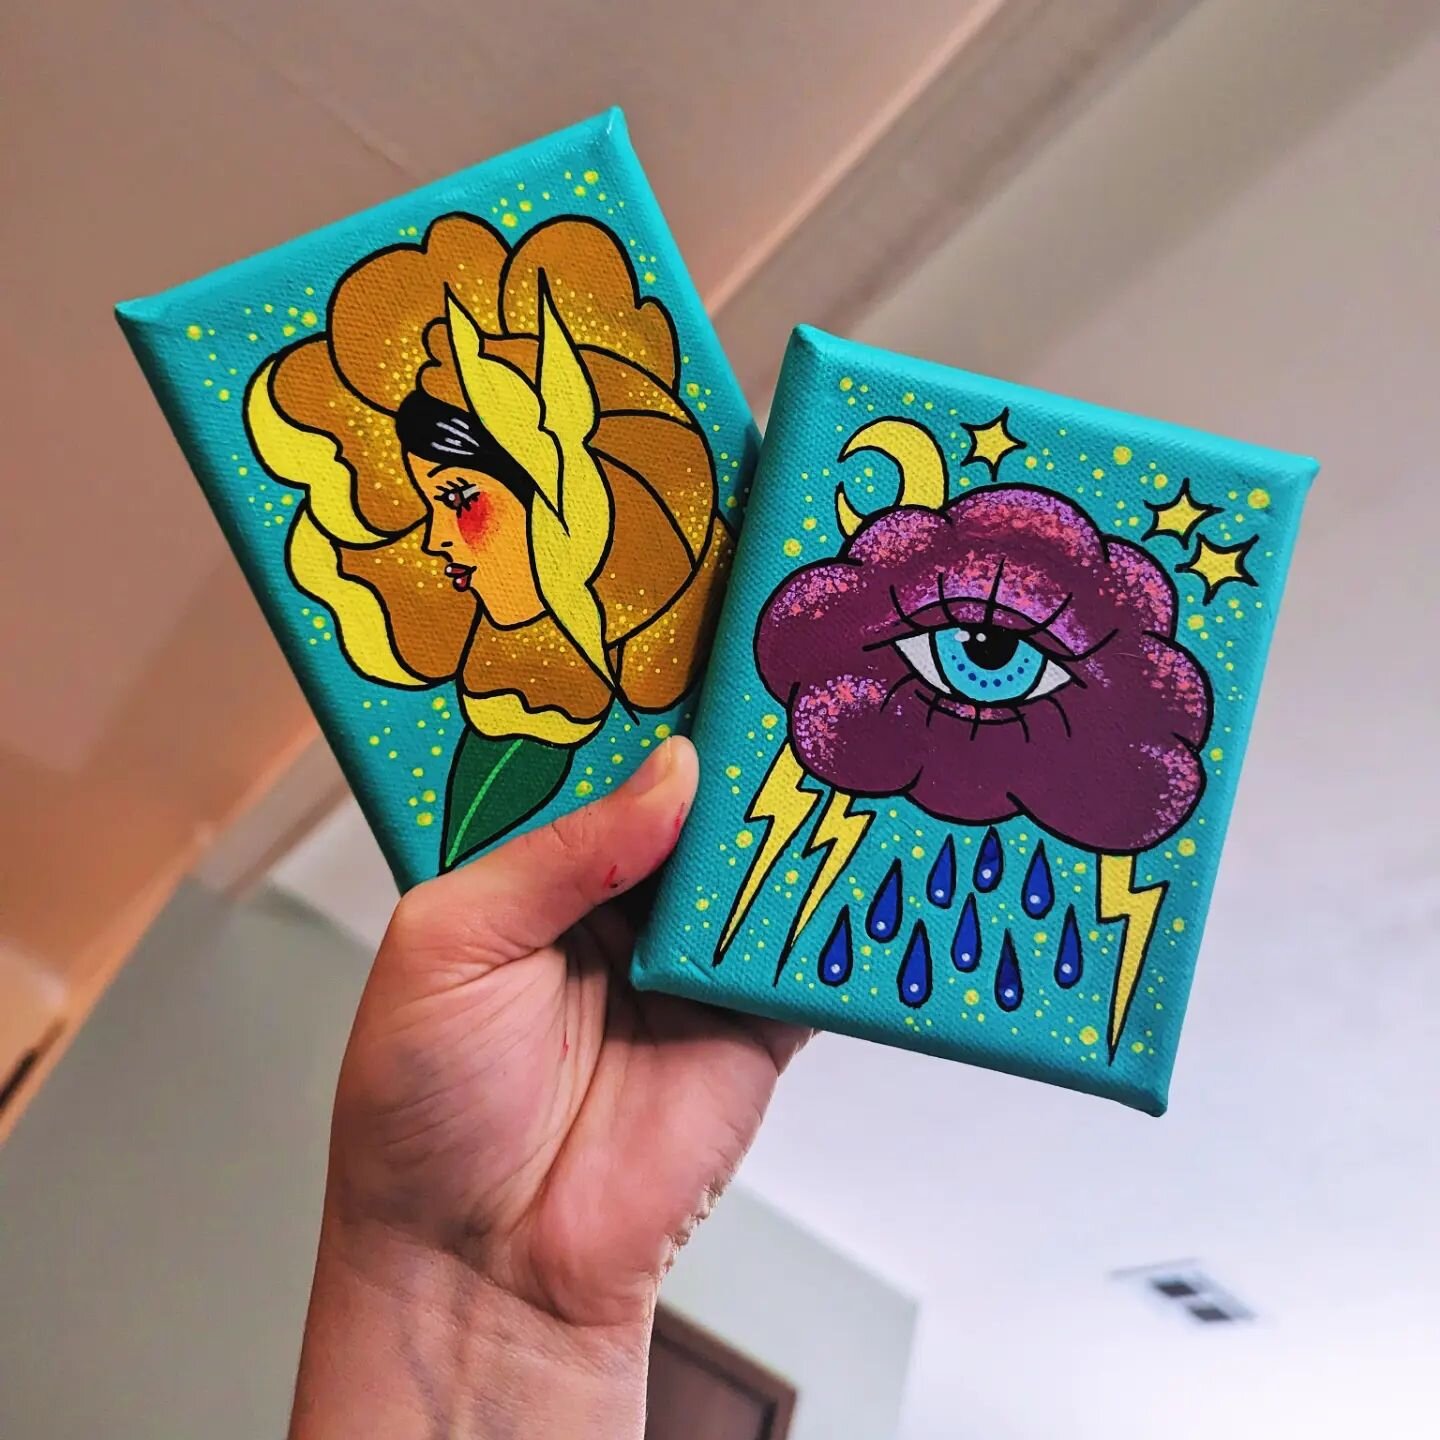 Been really going hard on small canvas paintings in preparation for some art markets this year 🌈 this will be my first time selling my art at an event, so really gotta show out!!!! Been really nice to come back to acrylic paints for a little bit too